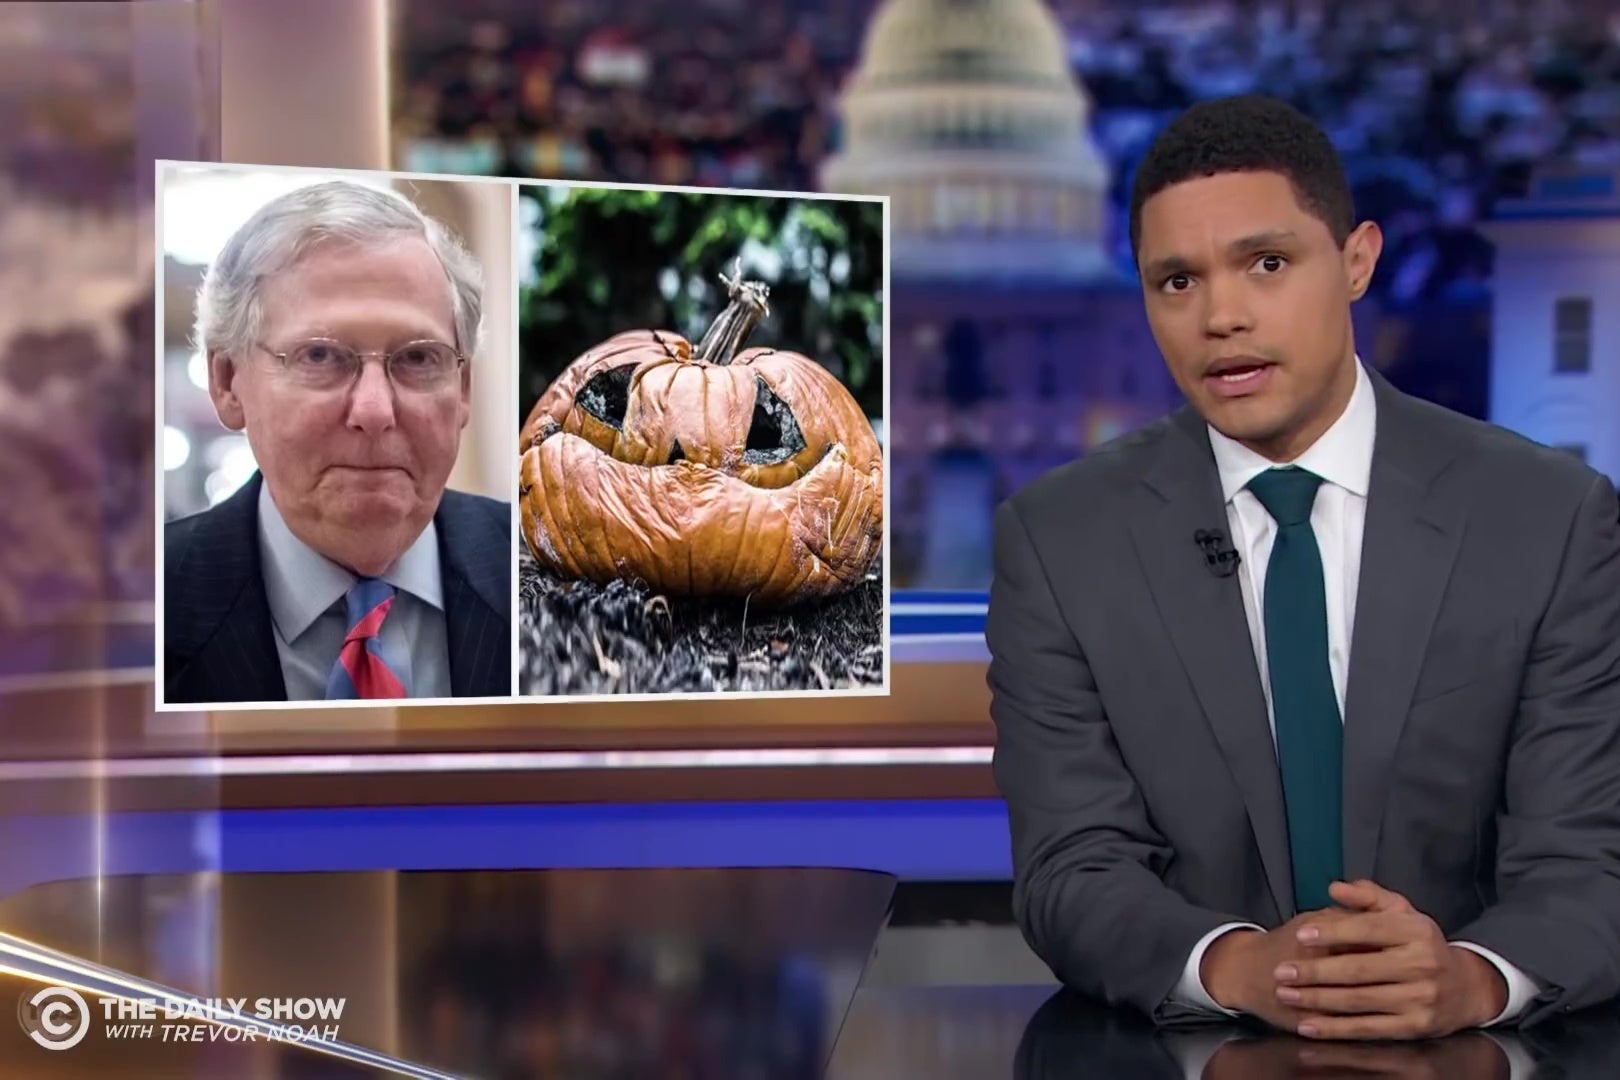 Trevor Noah of the Daily Show, in front of images of Mitch McConnell's face and a rotting jack-o-lantern that bears a strong resemblance to him.